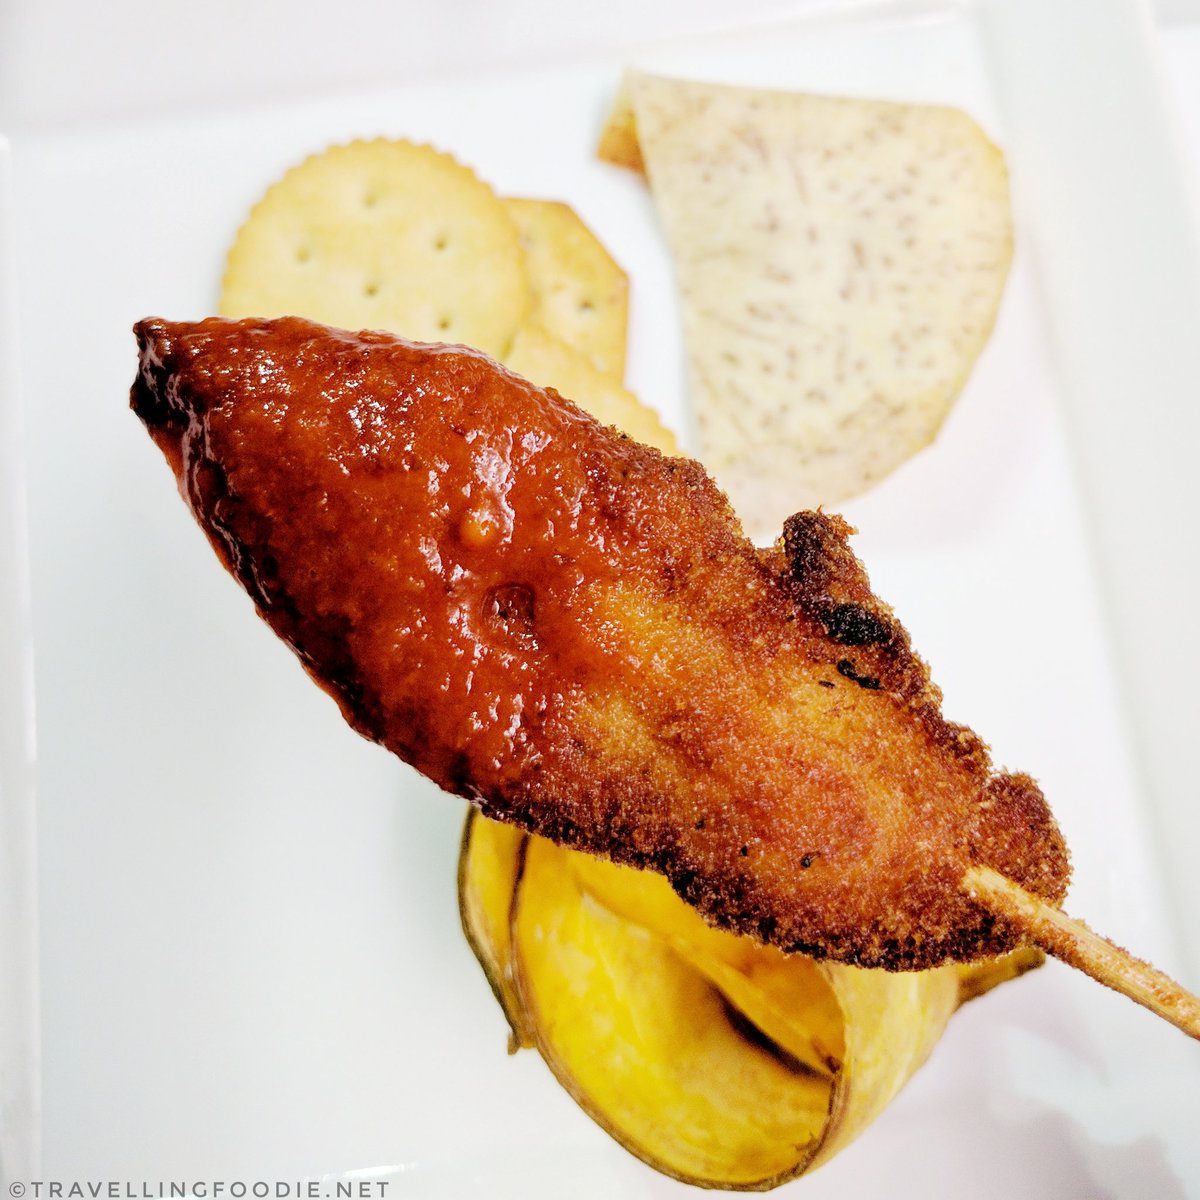 Traveling Foodie eats chicken at Air Canada media event